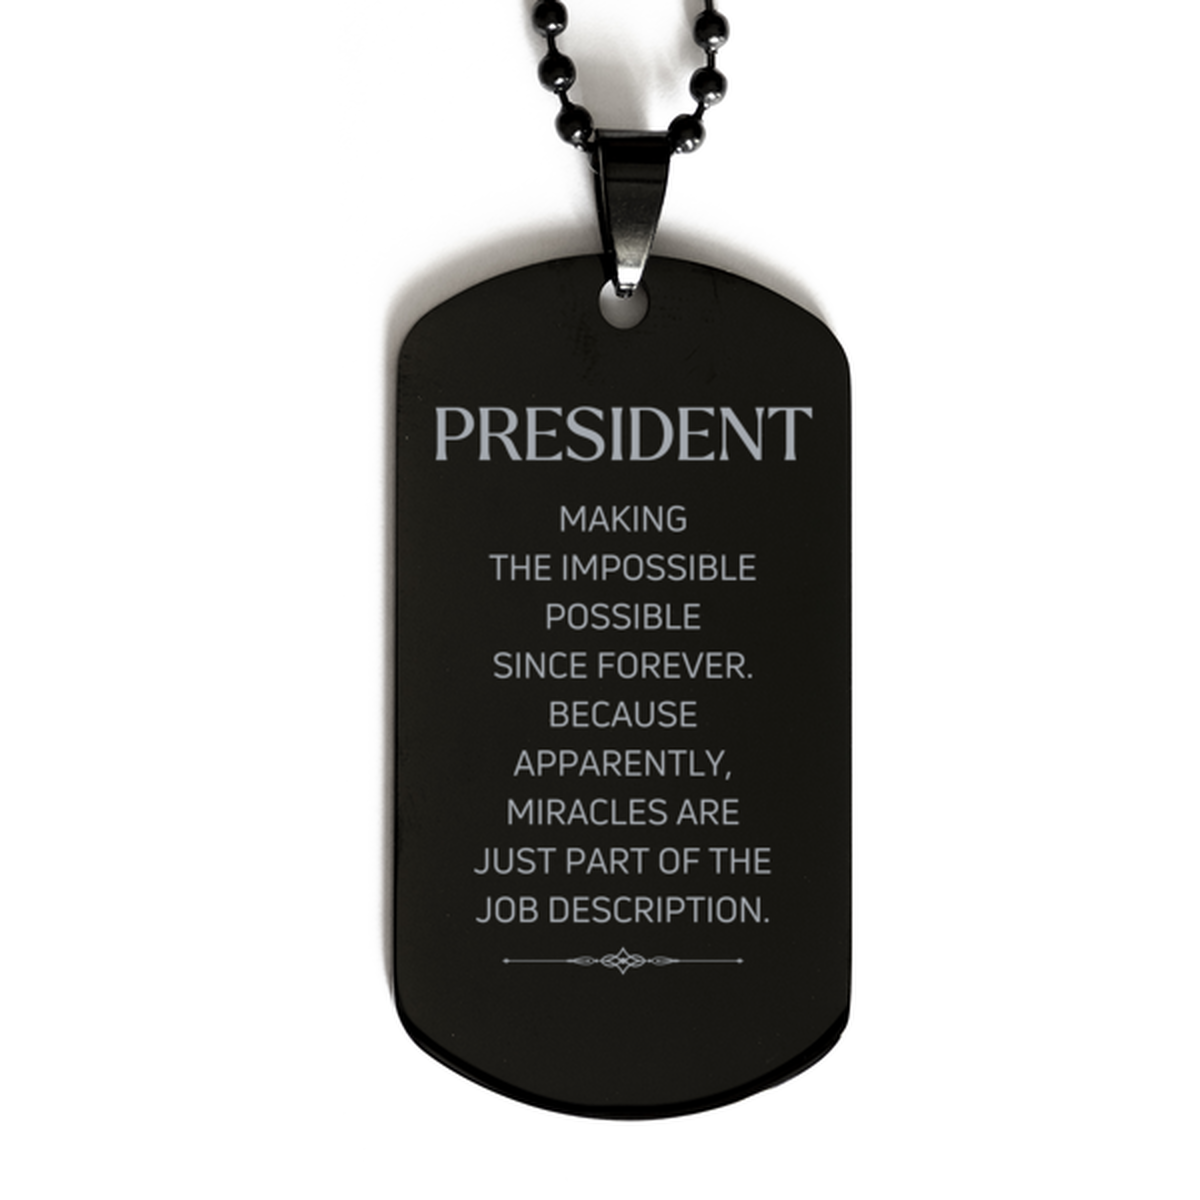 Funny President Gifts, Miracles are just part of the job description, Inspirational Birthday Black Dog Tag For President, Men, Women, Coworkers, Friends, Boss